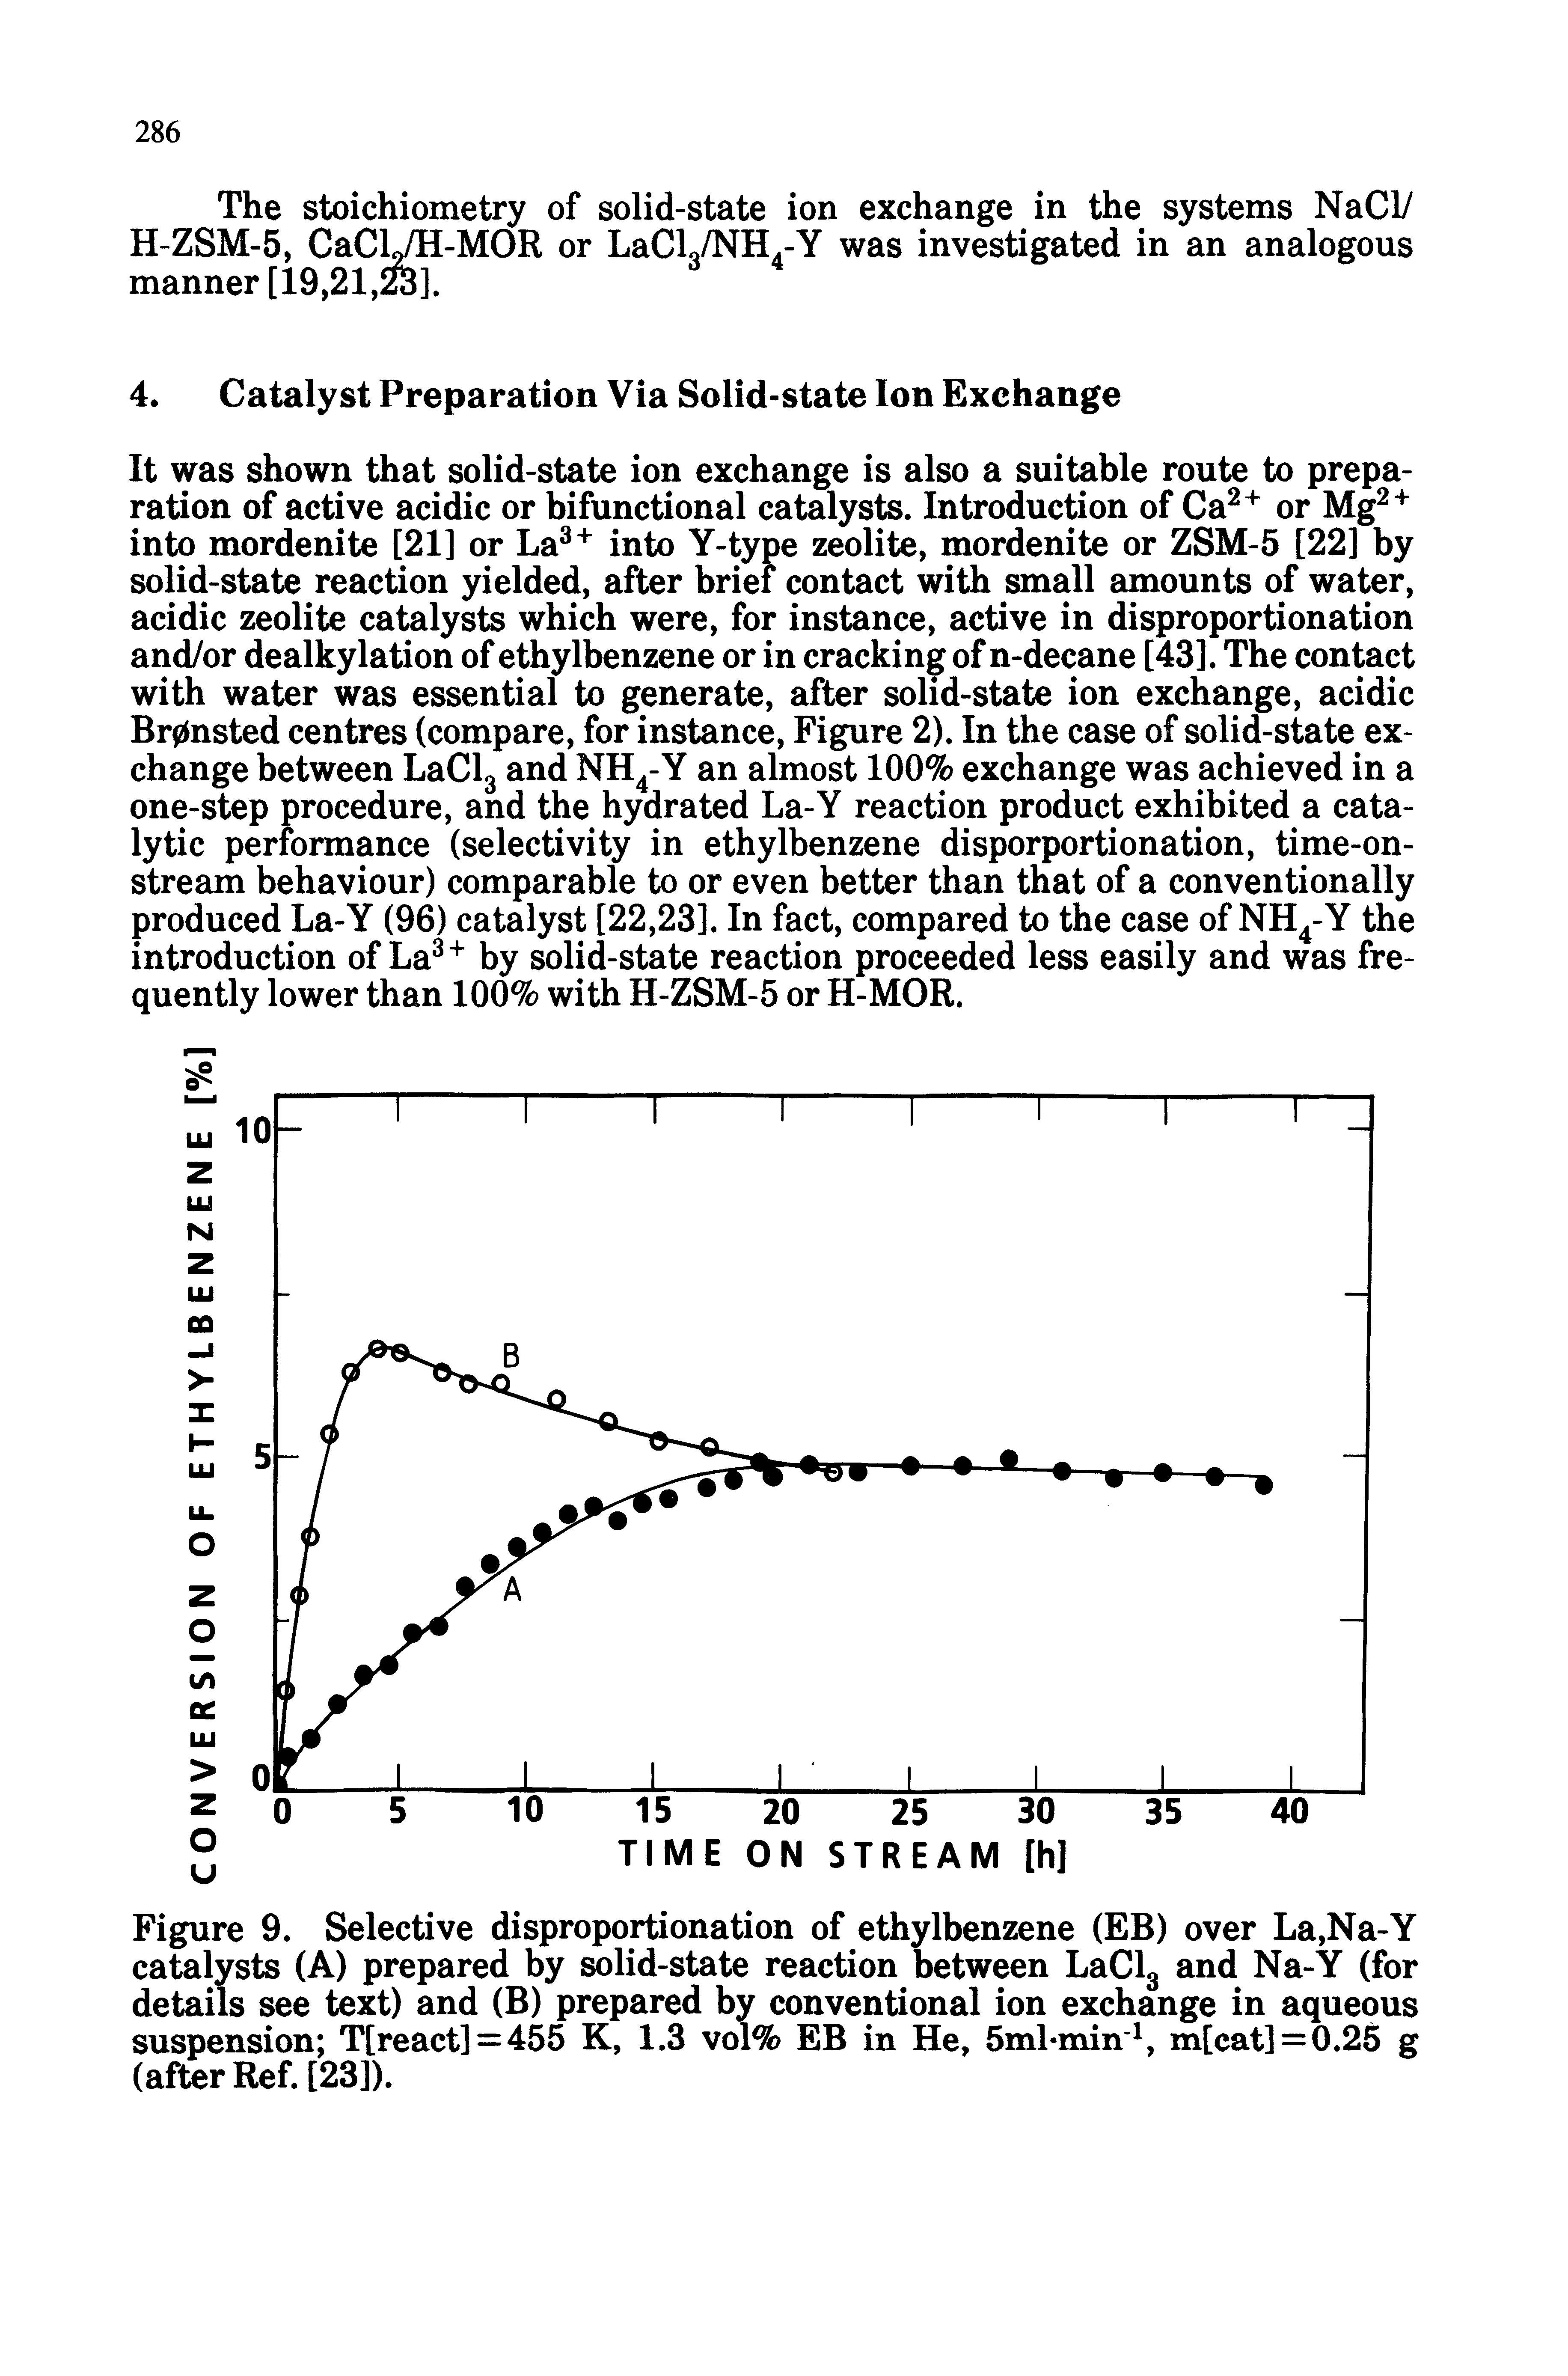 Figure 9. Selective disproportionation of ethylbenzene (EB) over La,Na-Y catalysts (A) prepared by solid-state reaction between LaClg and Na-Y (for details see text) and (B) prepared by conventional ion exchange in aqueous suspension T[react]=455 K, 1.3 vol% EB in He, 5ml-min, m[cat]=0.25 g (after Ref. [23]).